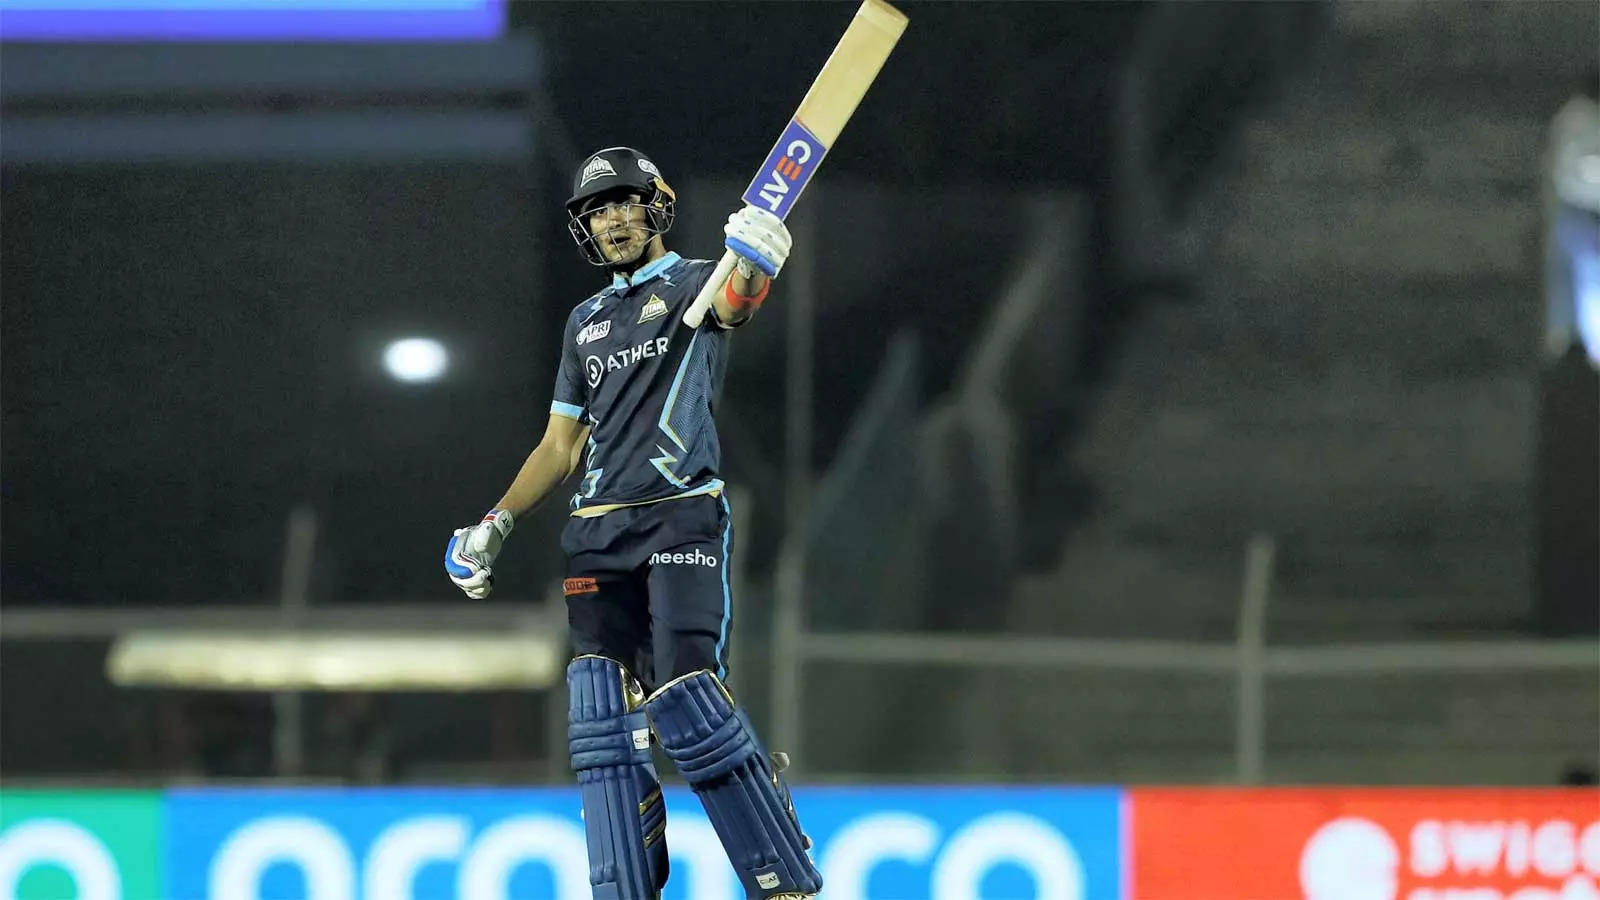 Shubman Gill has been in top form for Gujarat Titans